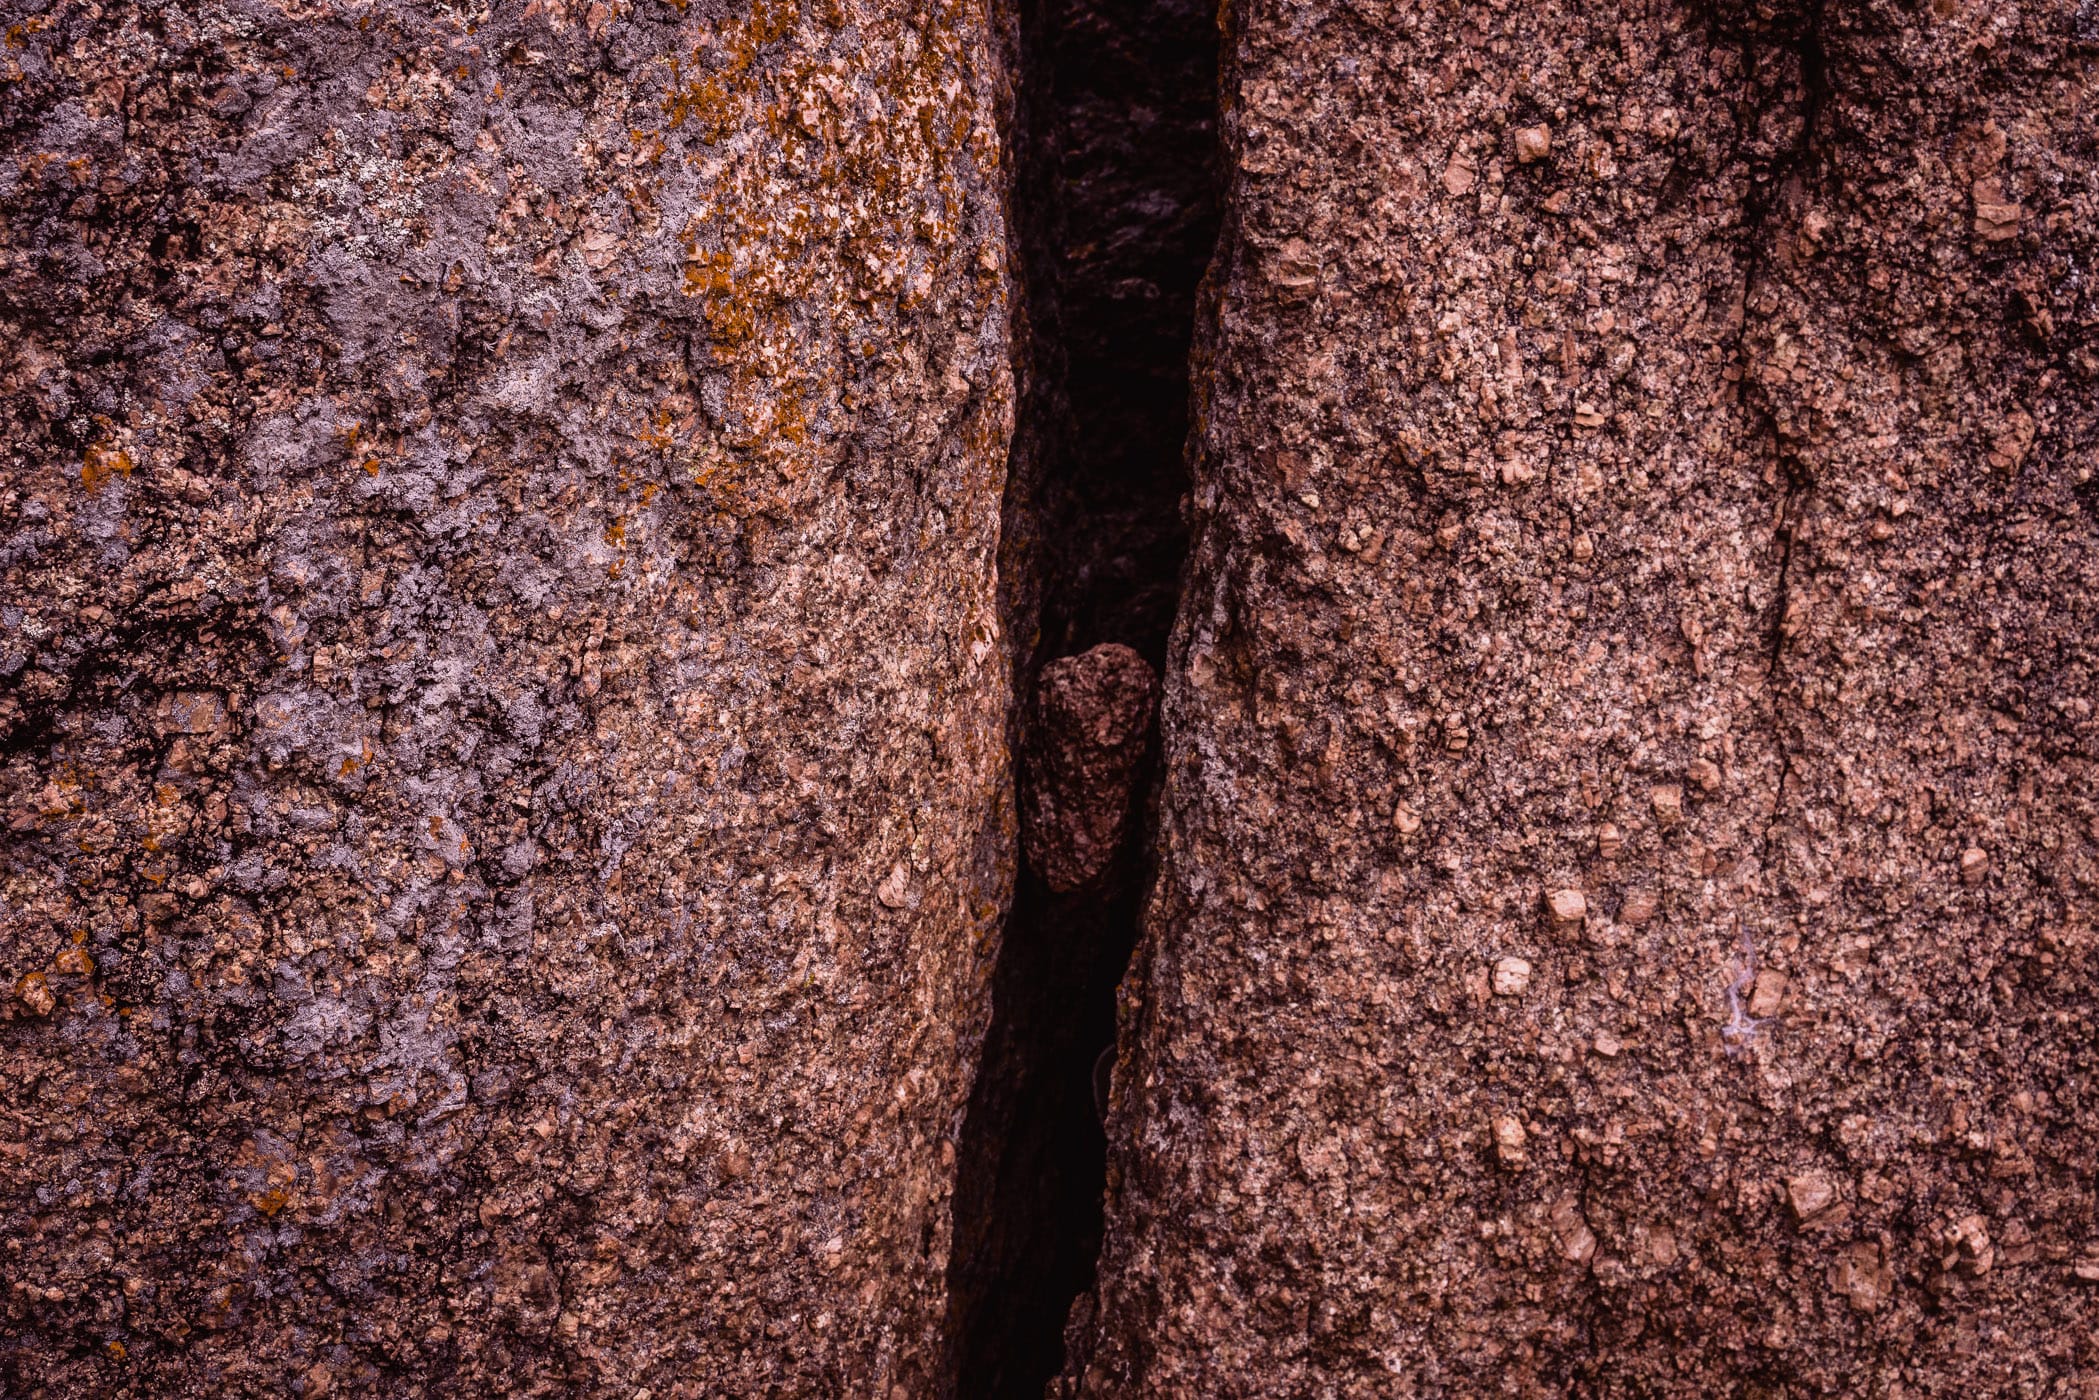 A rock trapped in a chasm between two larger rocks at Enchanted Rock State Natural Area, Texas.